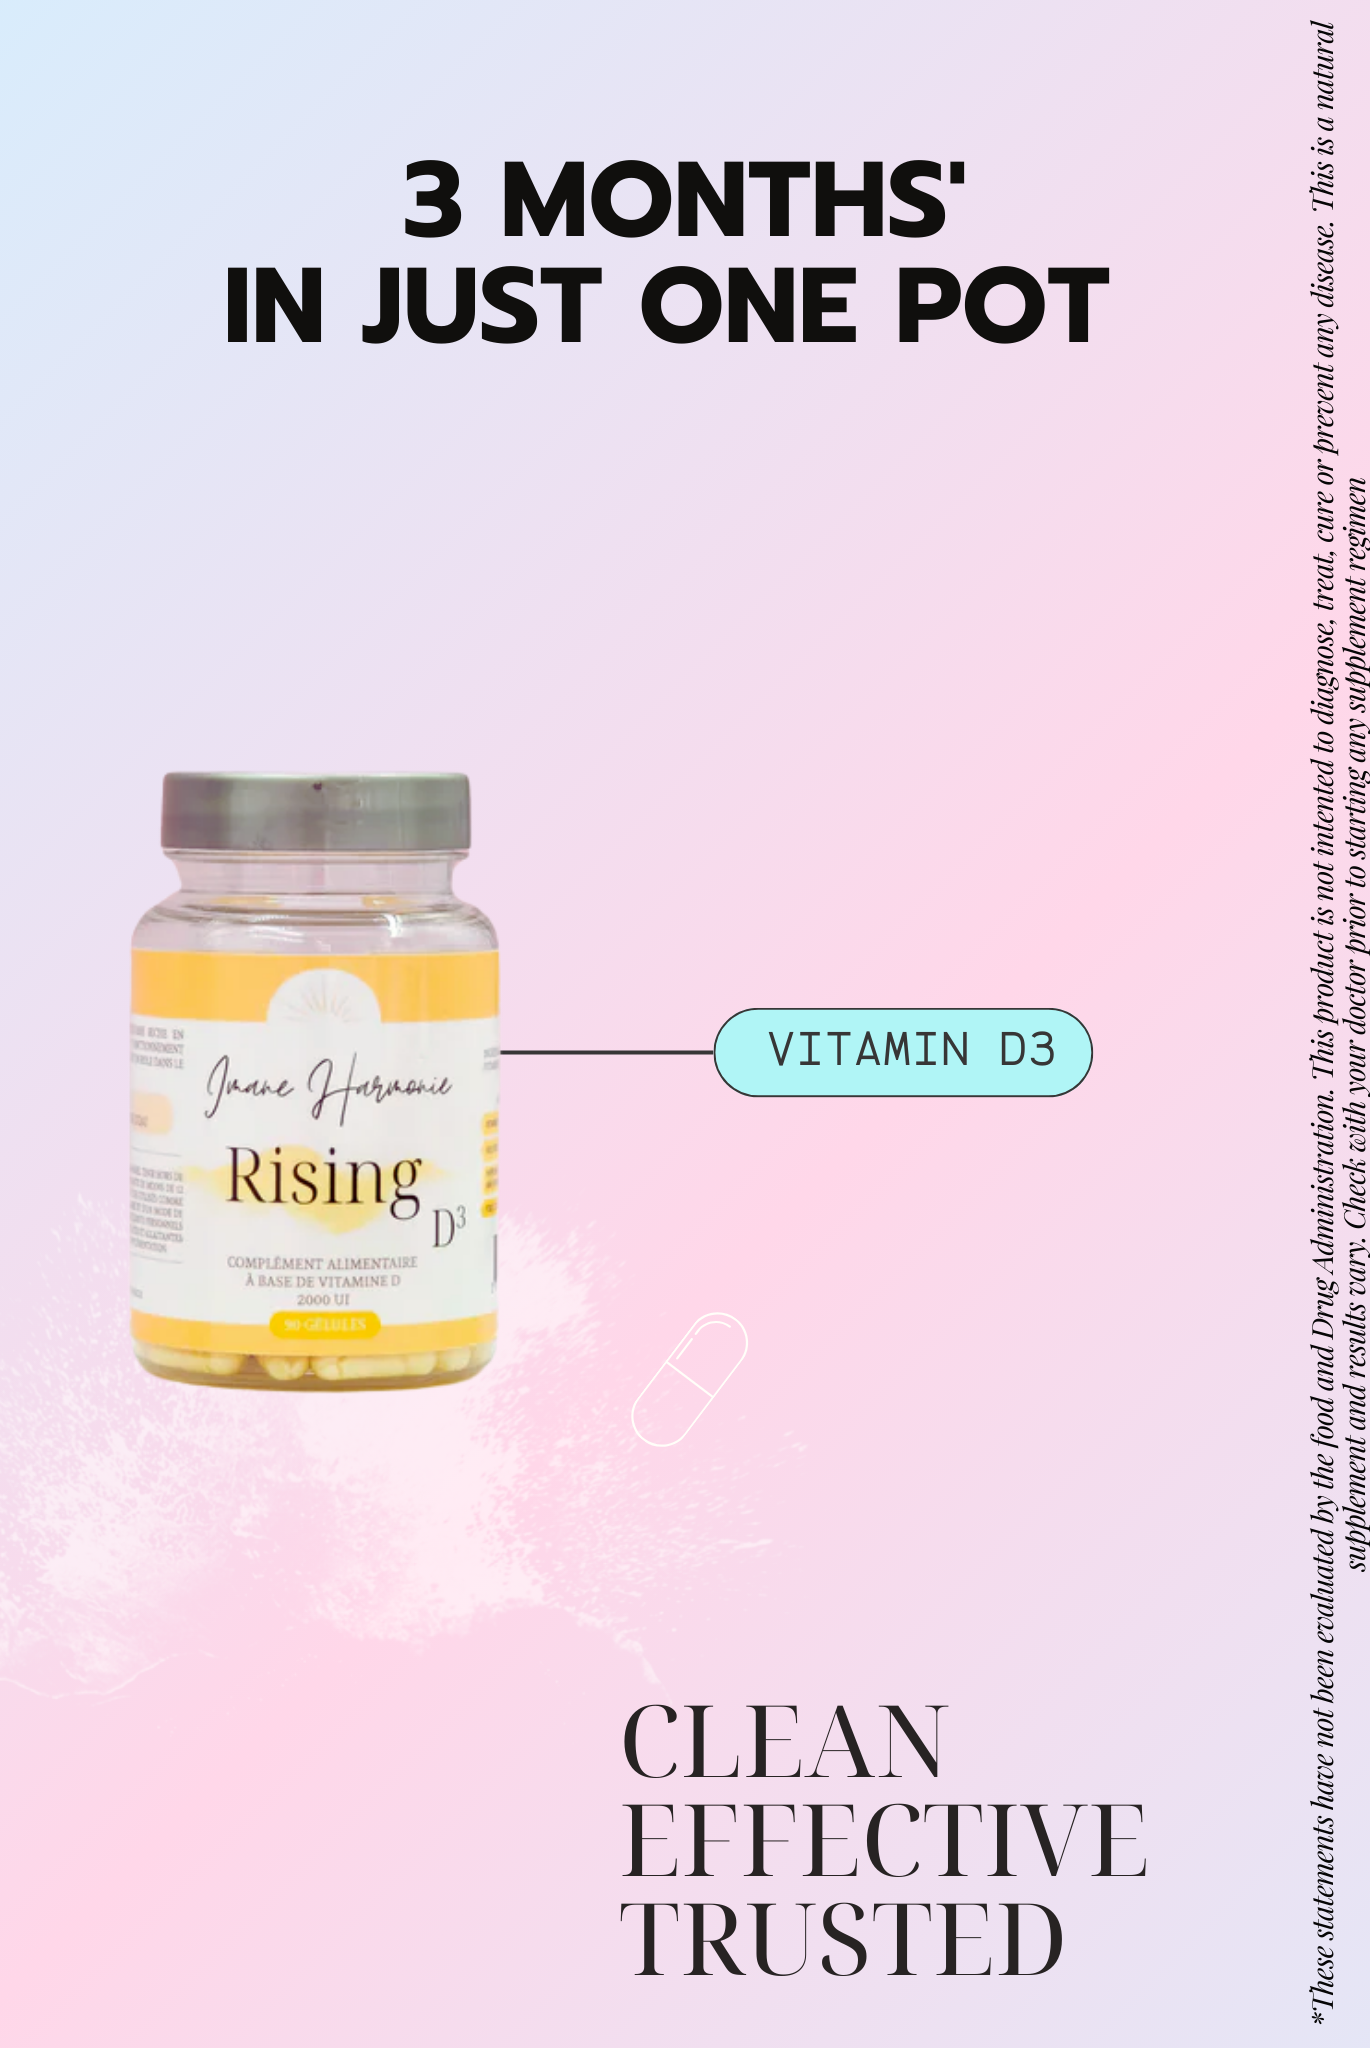 Primary supplement of rising D3 : vitamin D3